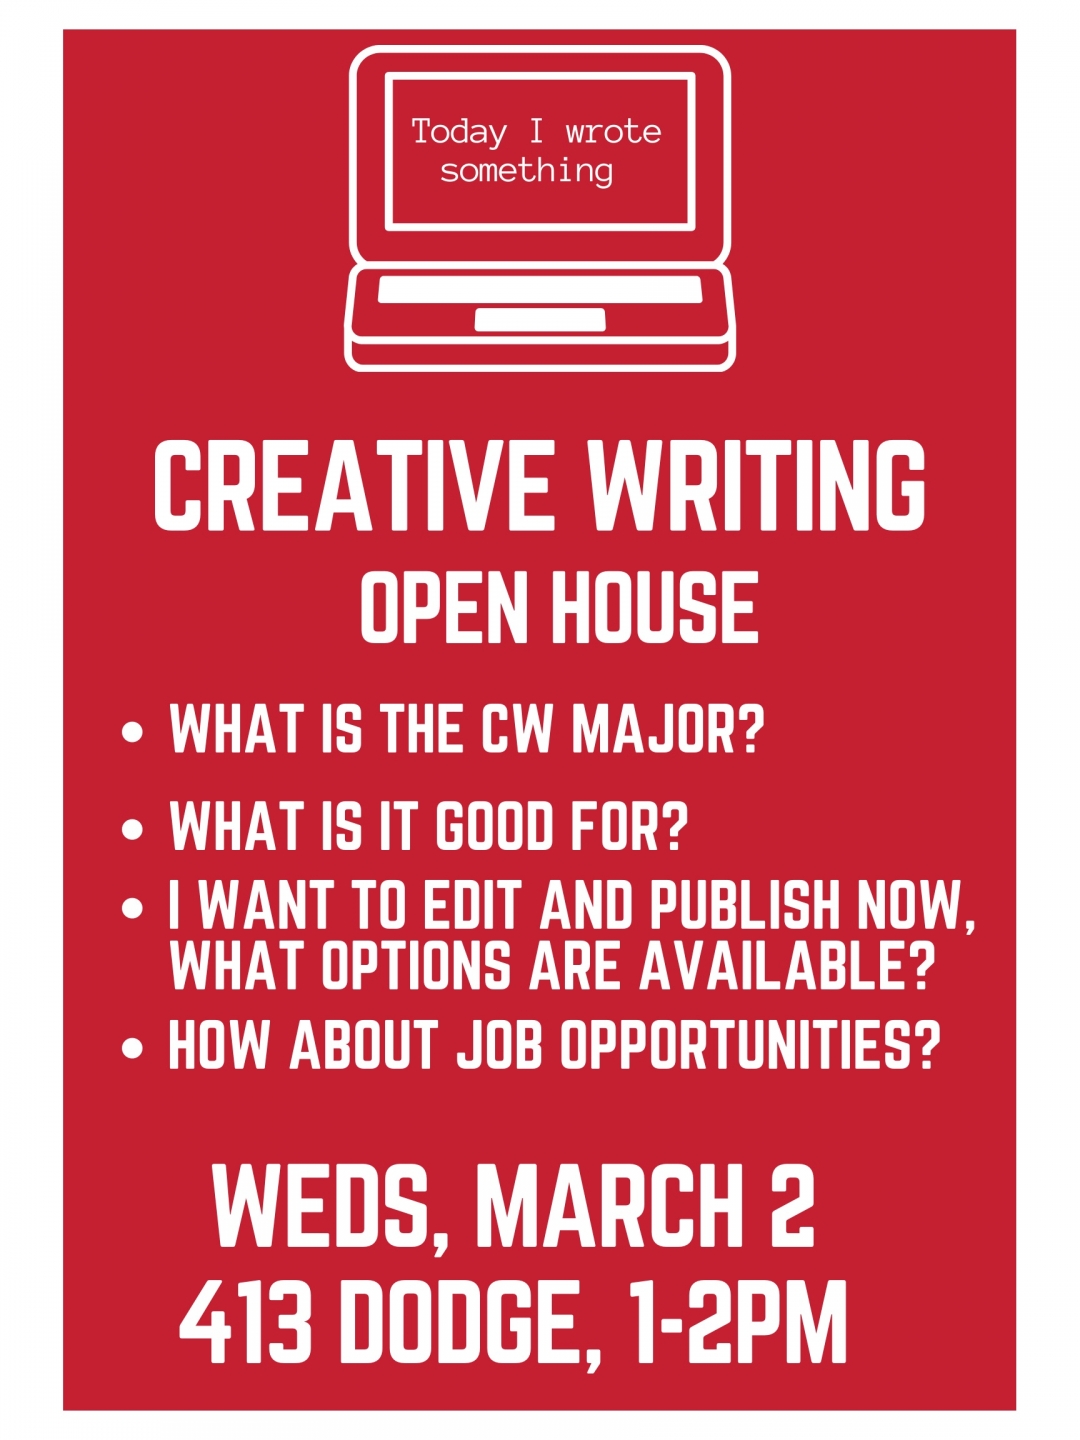 Creative Writing Open House Poster